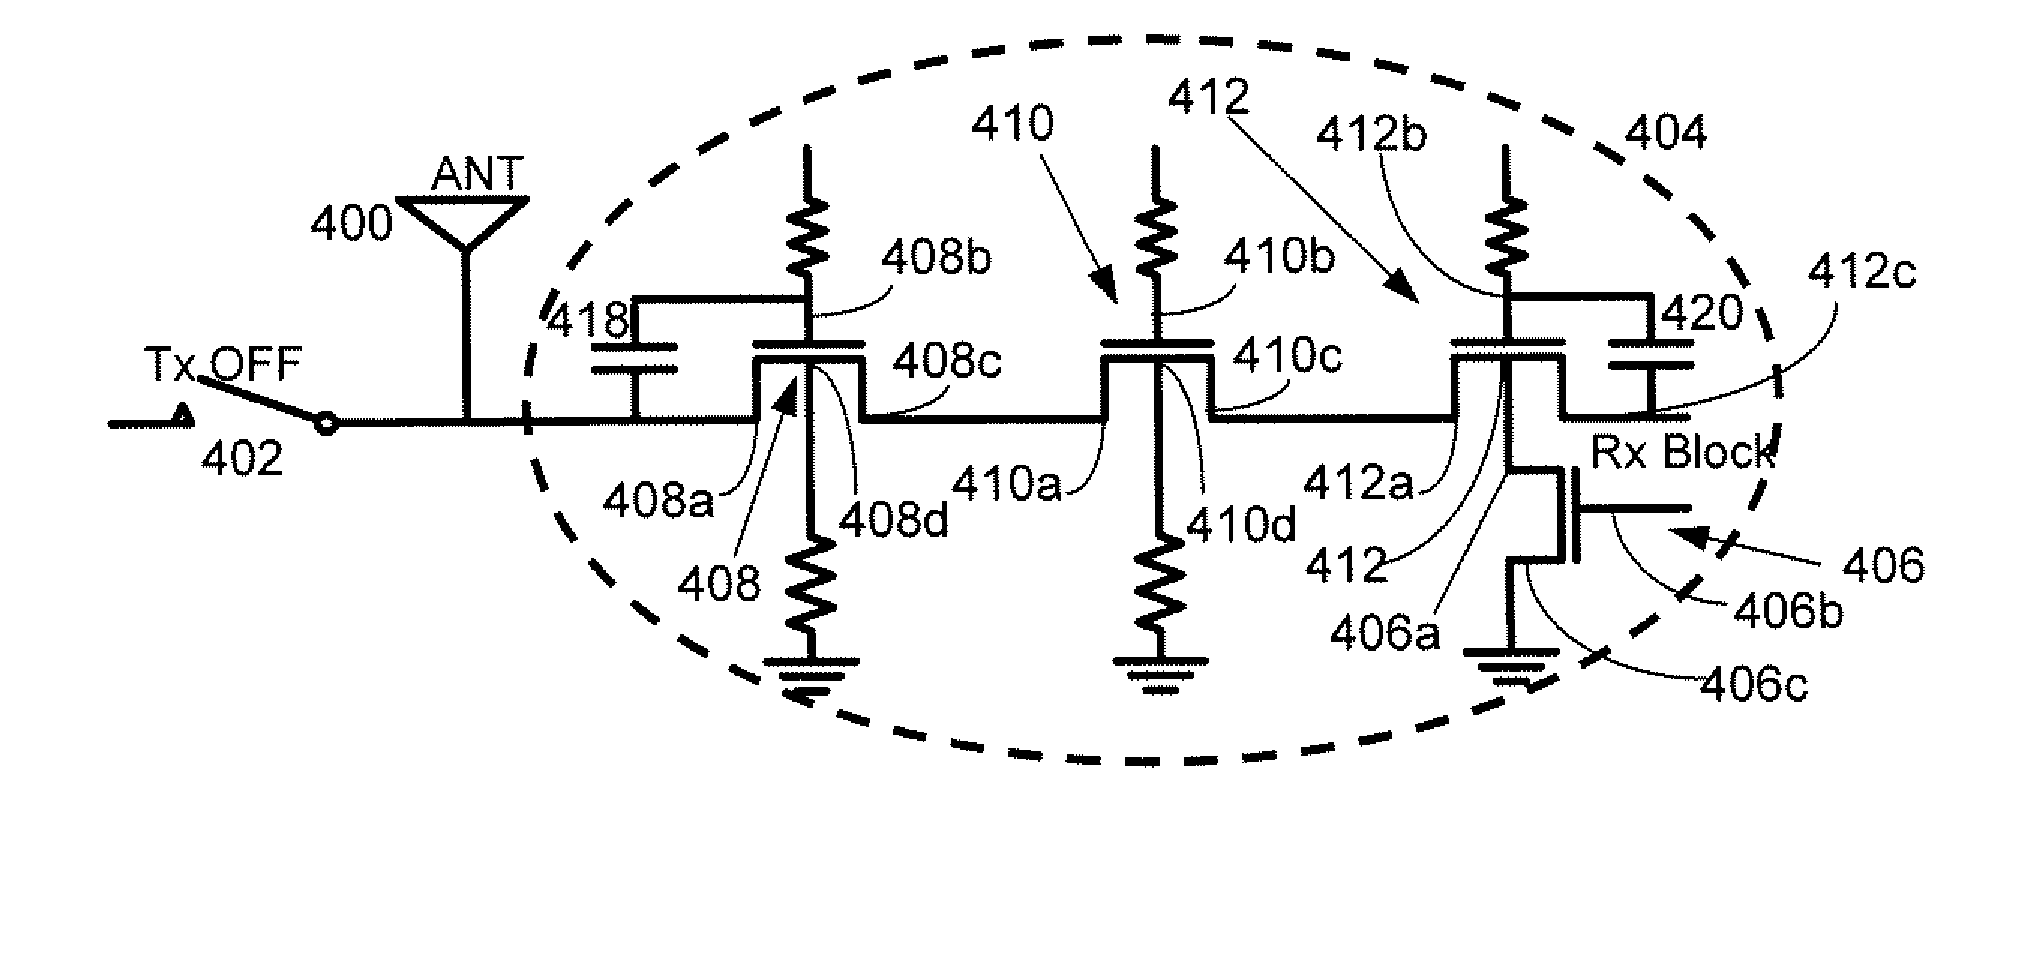 Systems, methods and apparatuses for high power complementary metal oxide semiconductor (CMOS) antenna switches using body switching and external component in multi-stacking structure